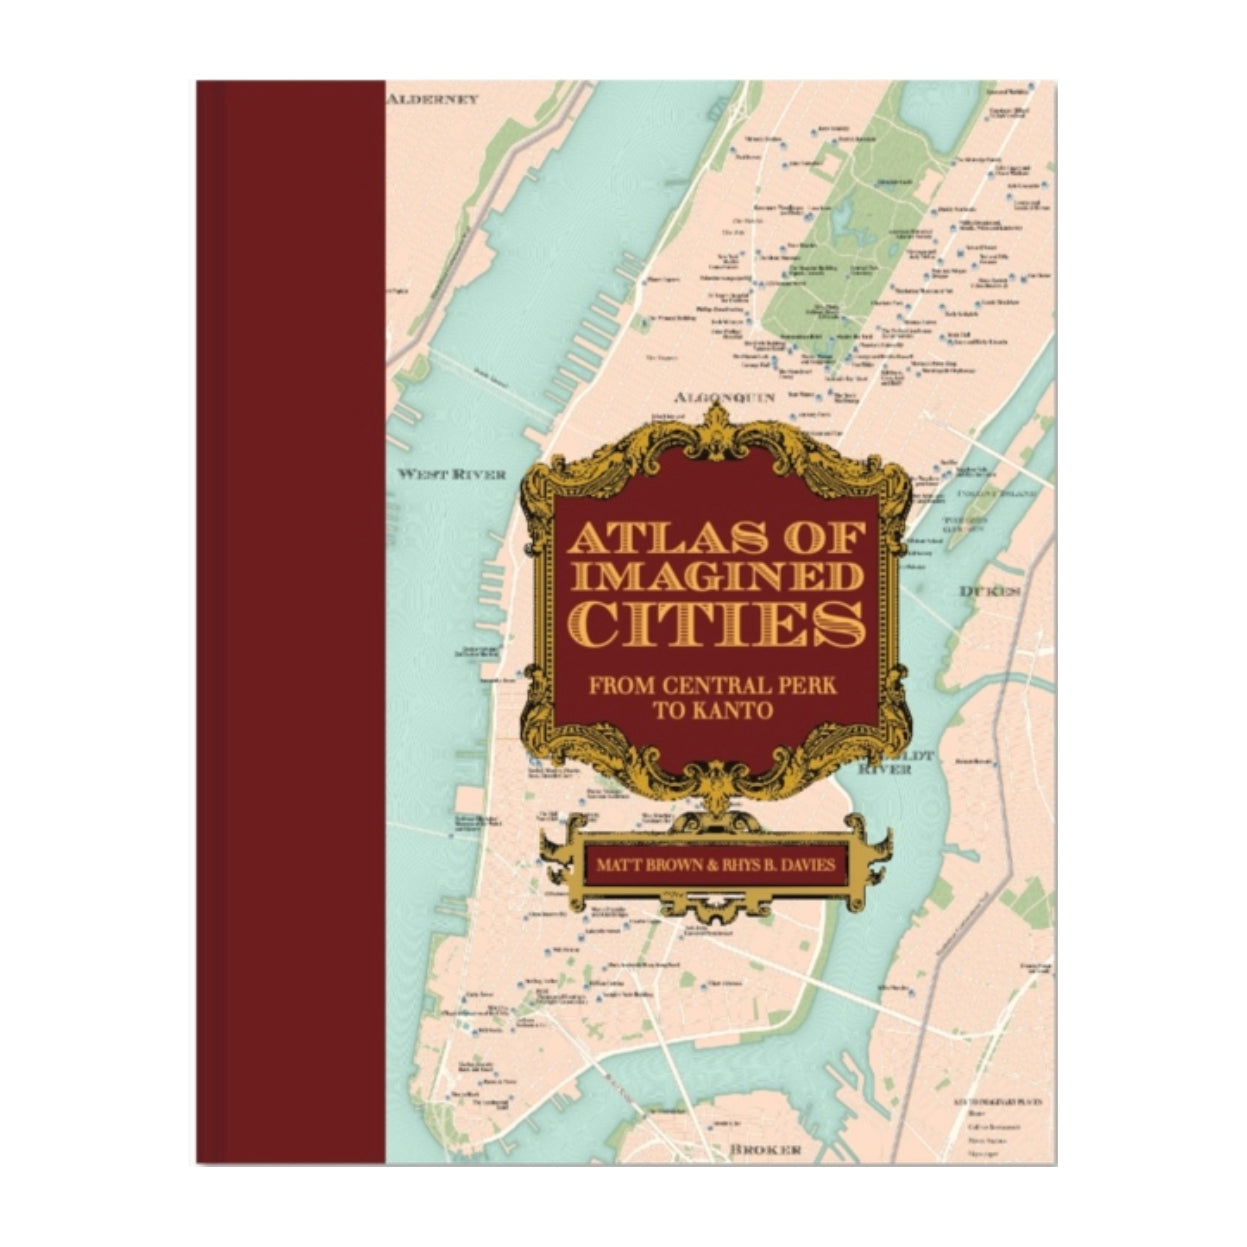 Atlas of Imagined Cities: Who Lives Where in Books, Games and Movies?